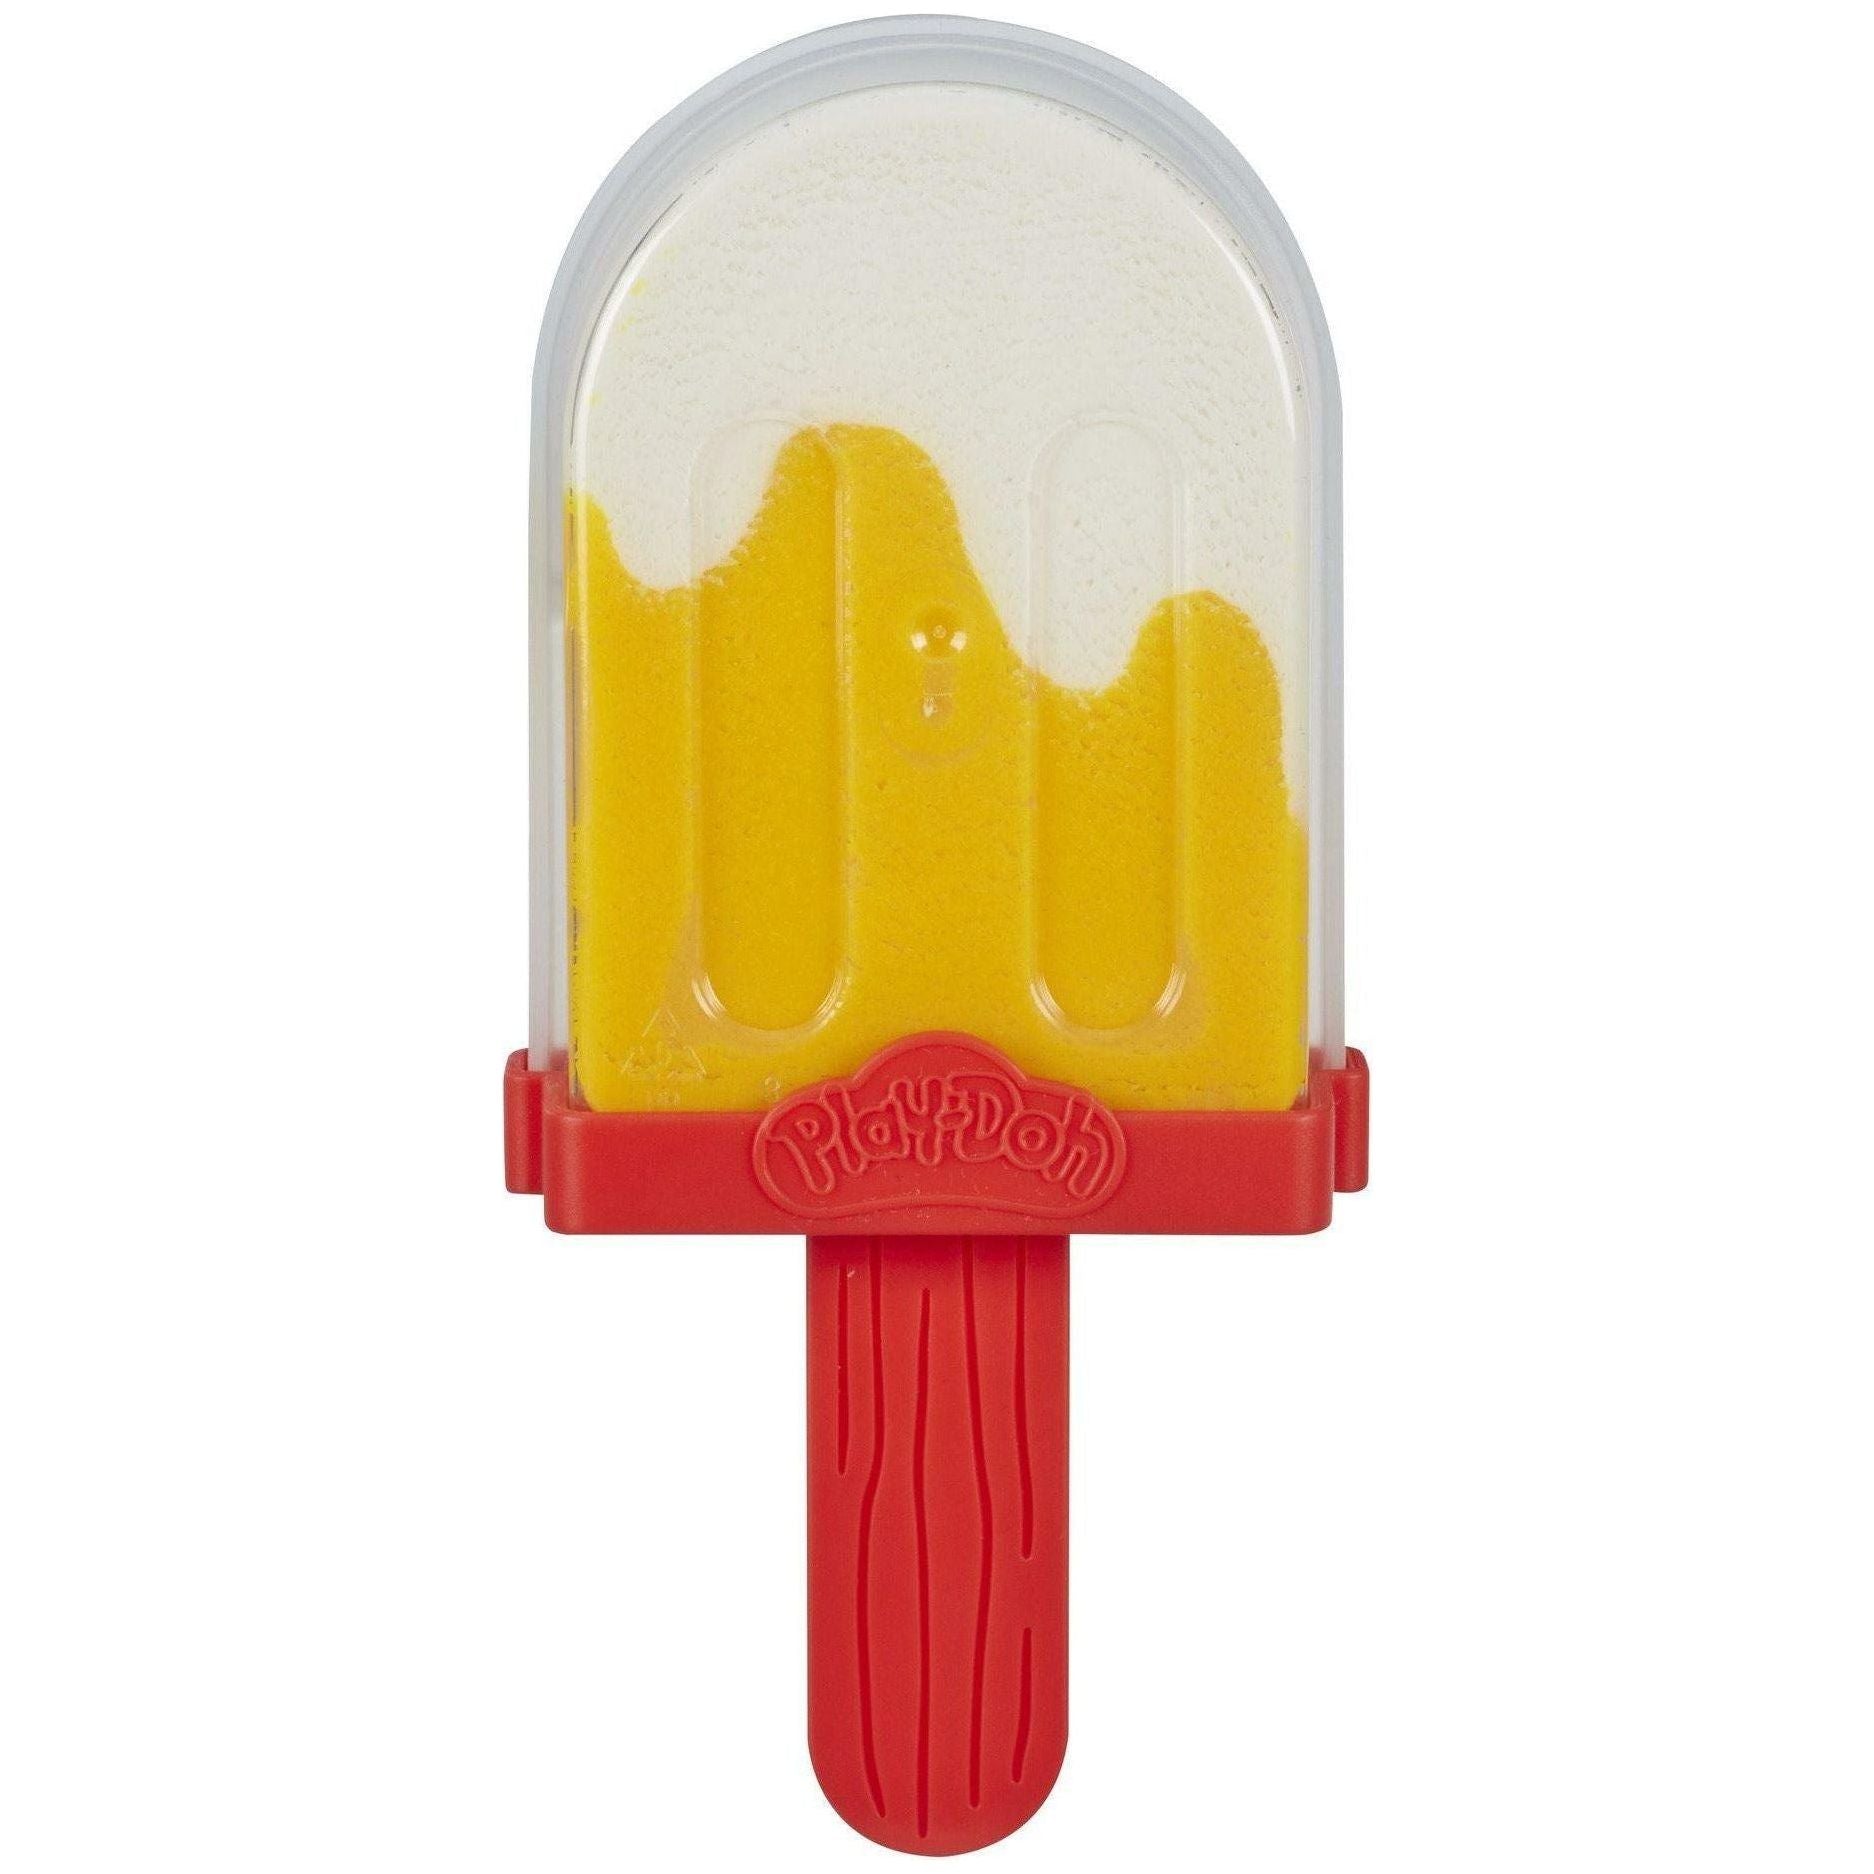 Hasbro Play-Doh Ice Pops Stick 84g - BumbleToys - 5-7 Years, Boys, Eagle Plus, Girls, Make & Create, Play-doh